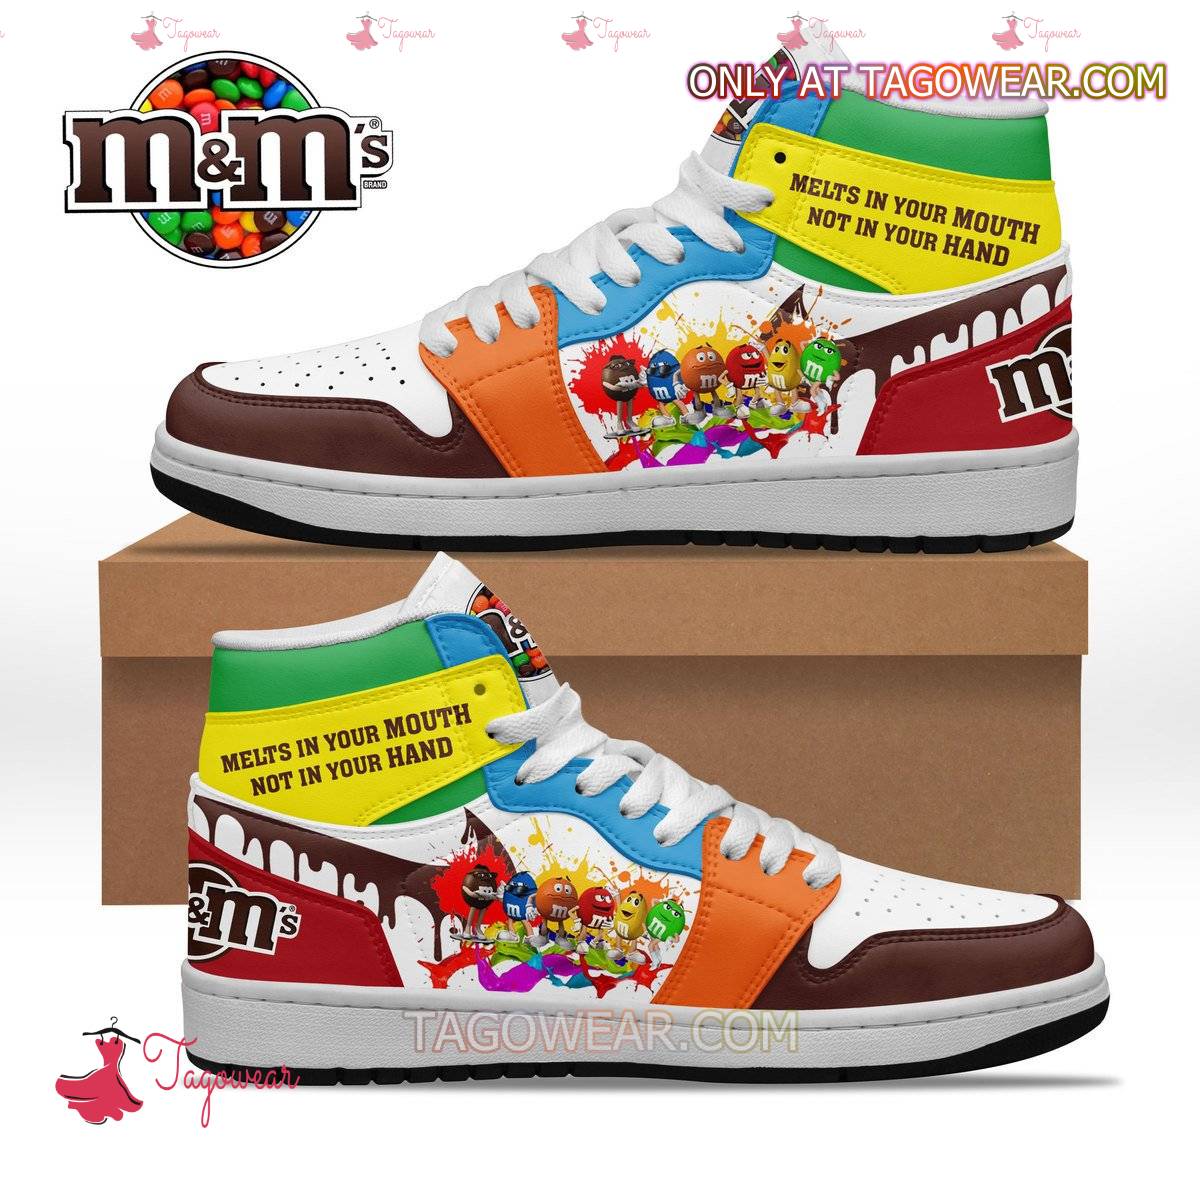 M&m's Melts In Your Mouth Not In Your Hands Air Jordan High Top Shoes